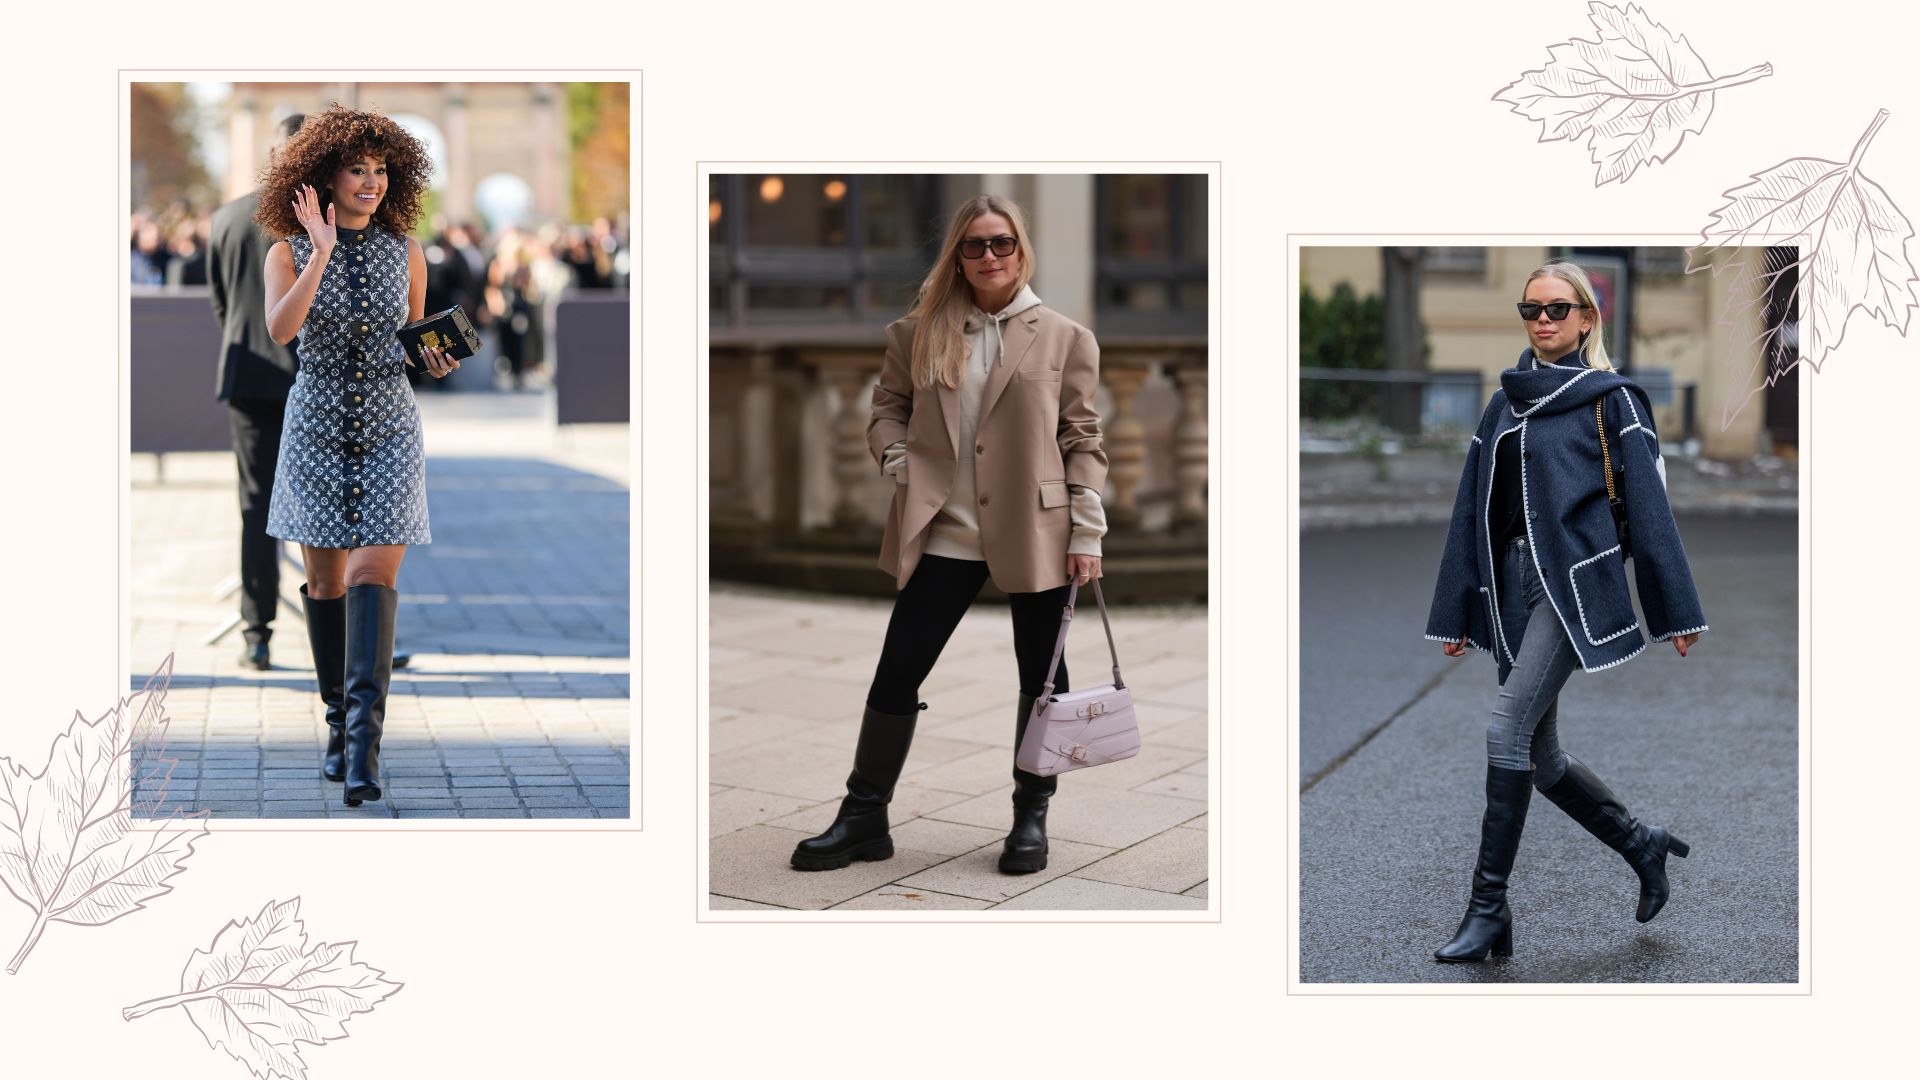 How to Wear Knee High Boots 7 Ways